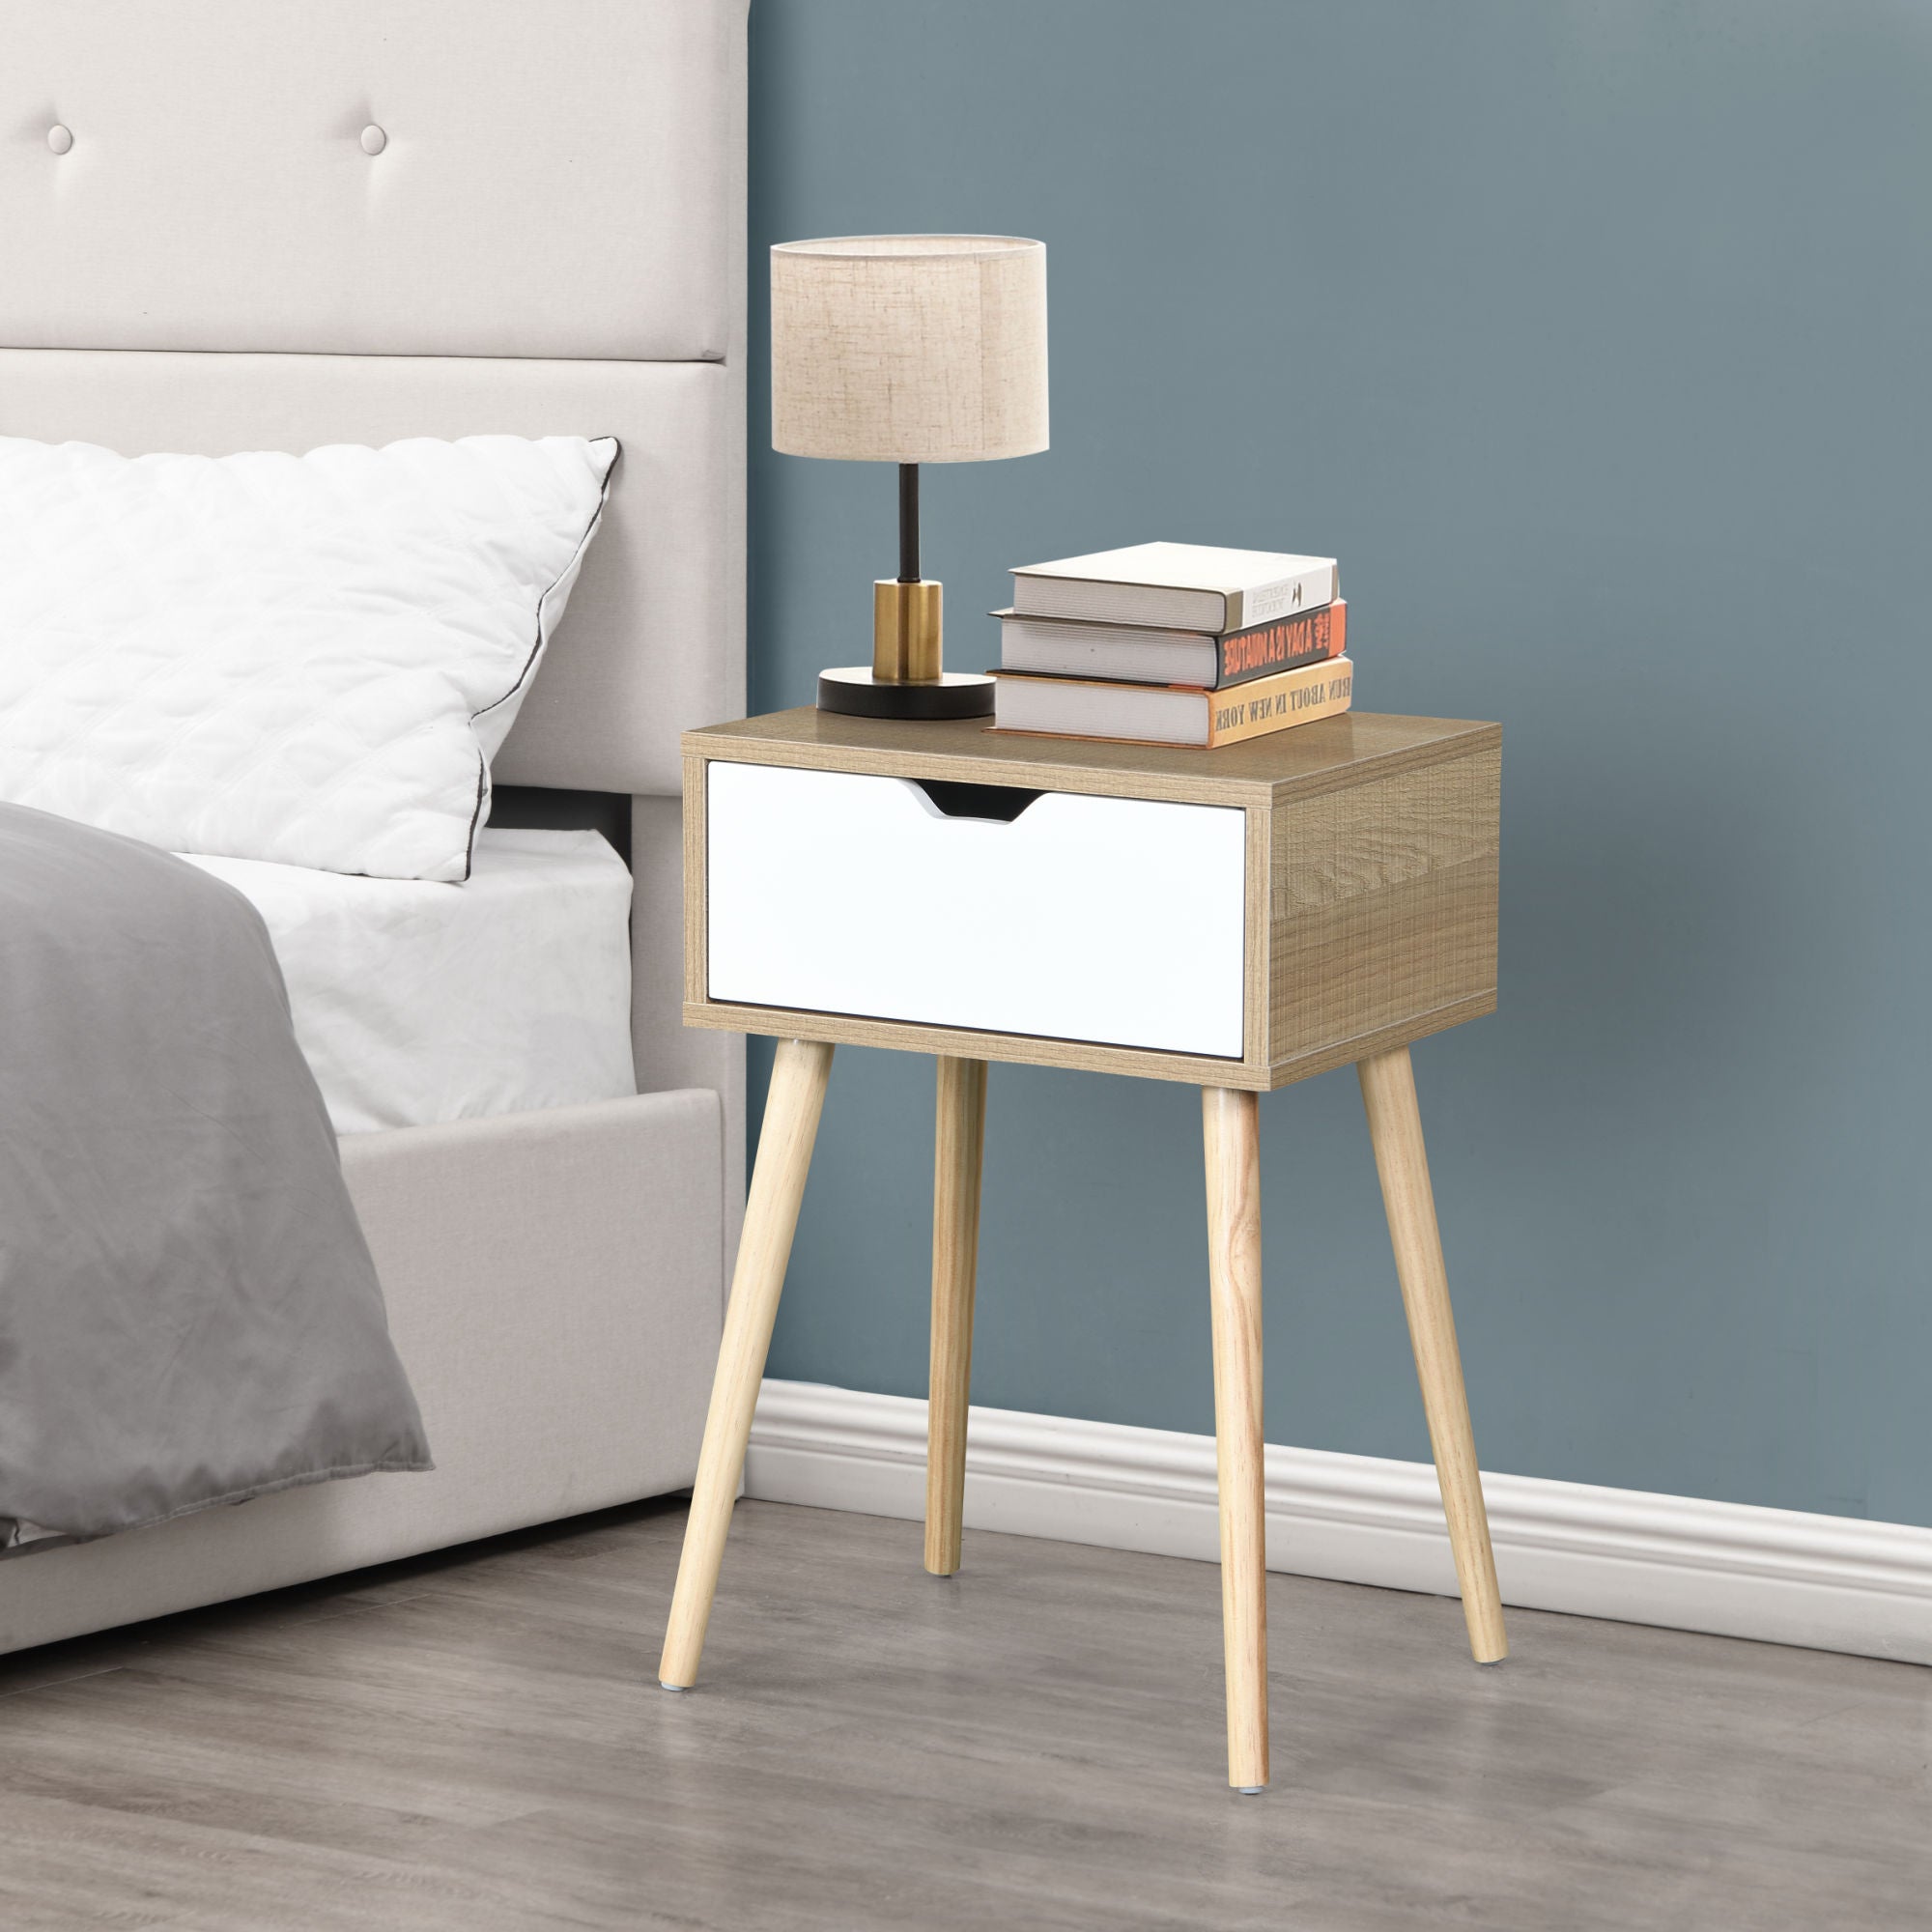 Side Table with 1 Drawer and Rubber Wood Legs;  Mid-Century Modern Storage Cabinet for Bedroom Living Room Furniture;  White with solid wood color